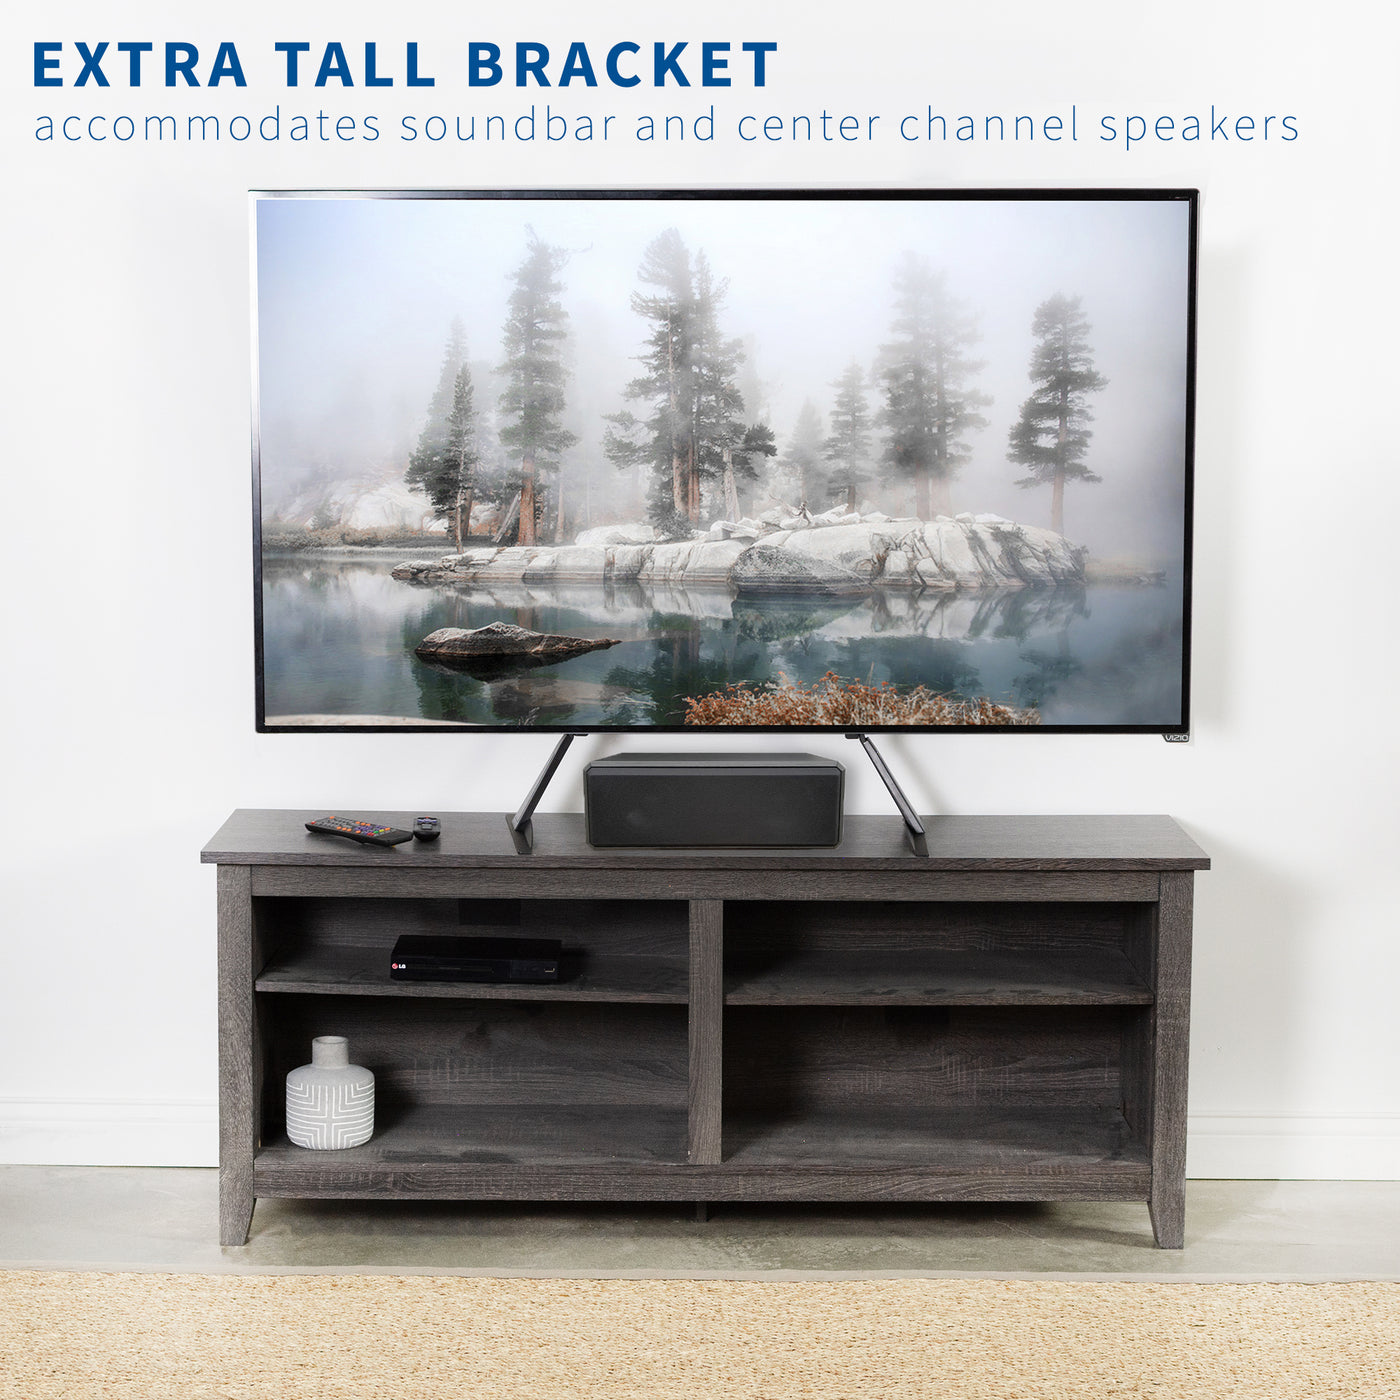 Extra tall brackets allow you to mount up to 85-inch TVs while placing sound bars or other items under the elevated TV.